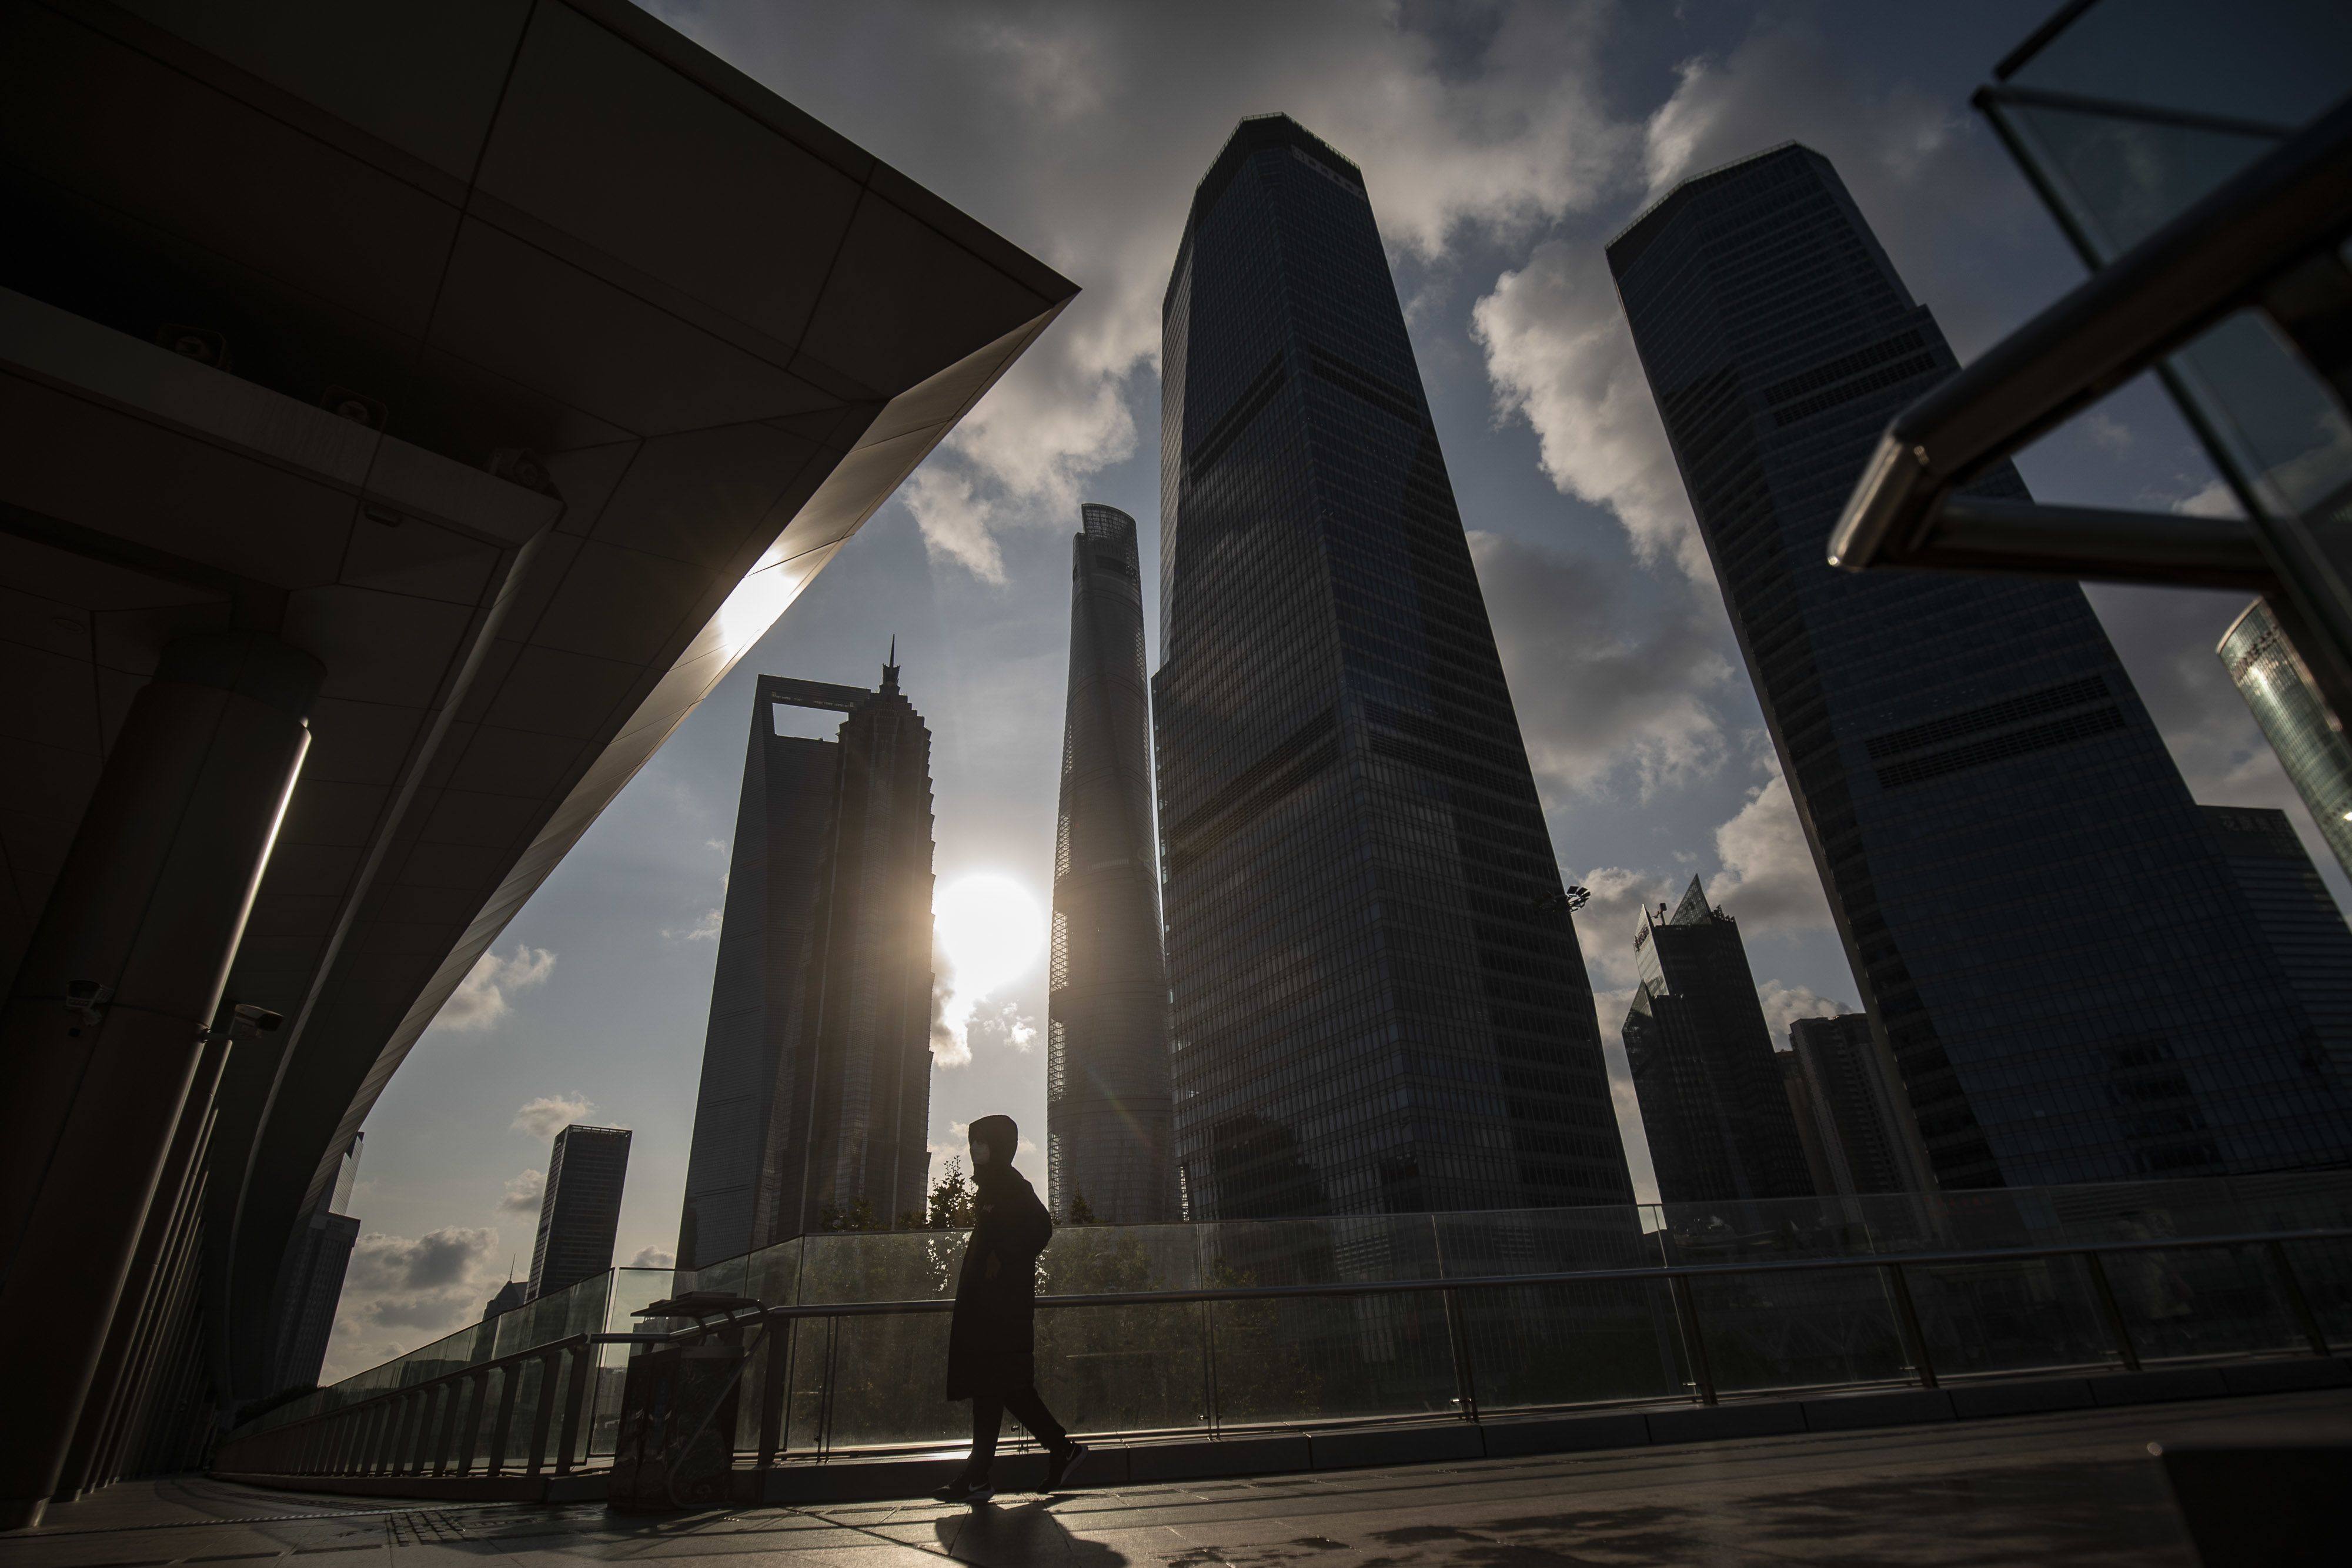 A pedestrian walks through Pudong’s Lujiazui Financial District in Shanghai in January 2023. The government has announced plans to cap the annual salaries of financial workers at around 3 million yuan as part of efforts to redistribute talent and resources to more productive parts of the economy. Photo: Bloomberg